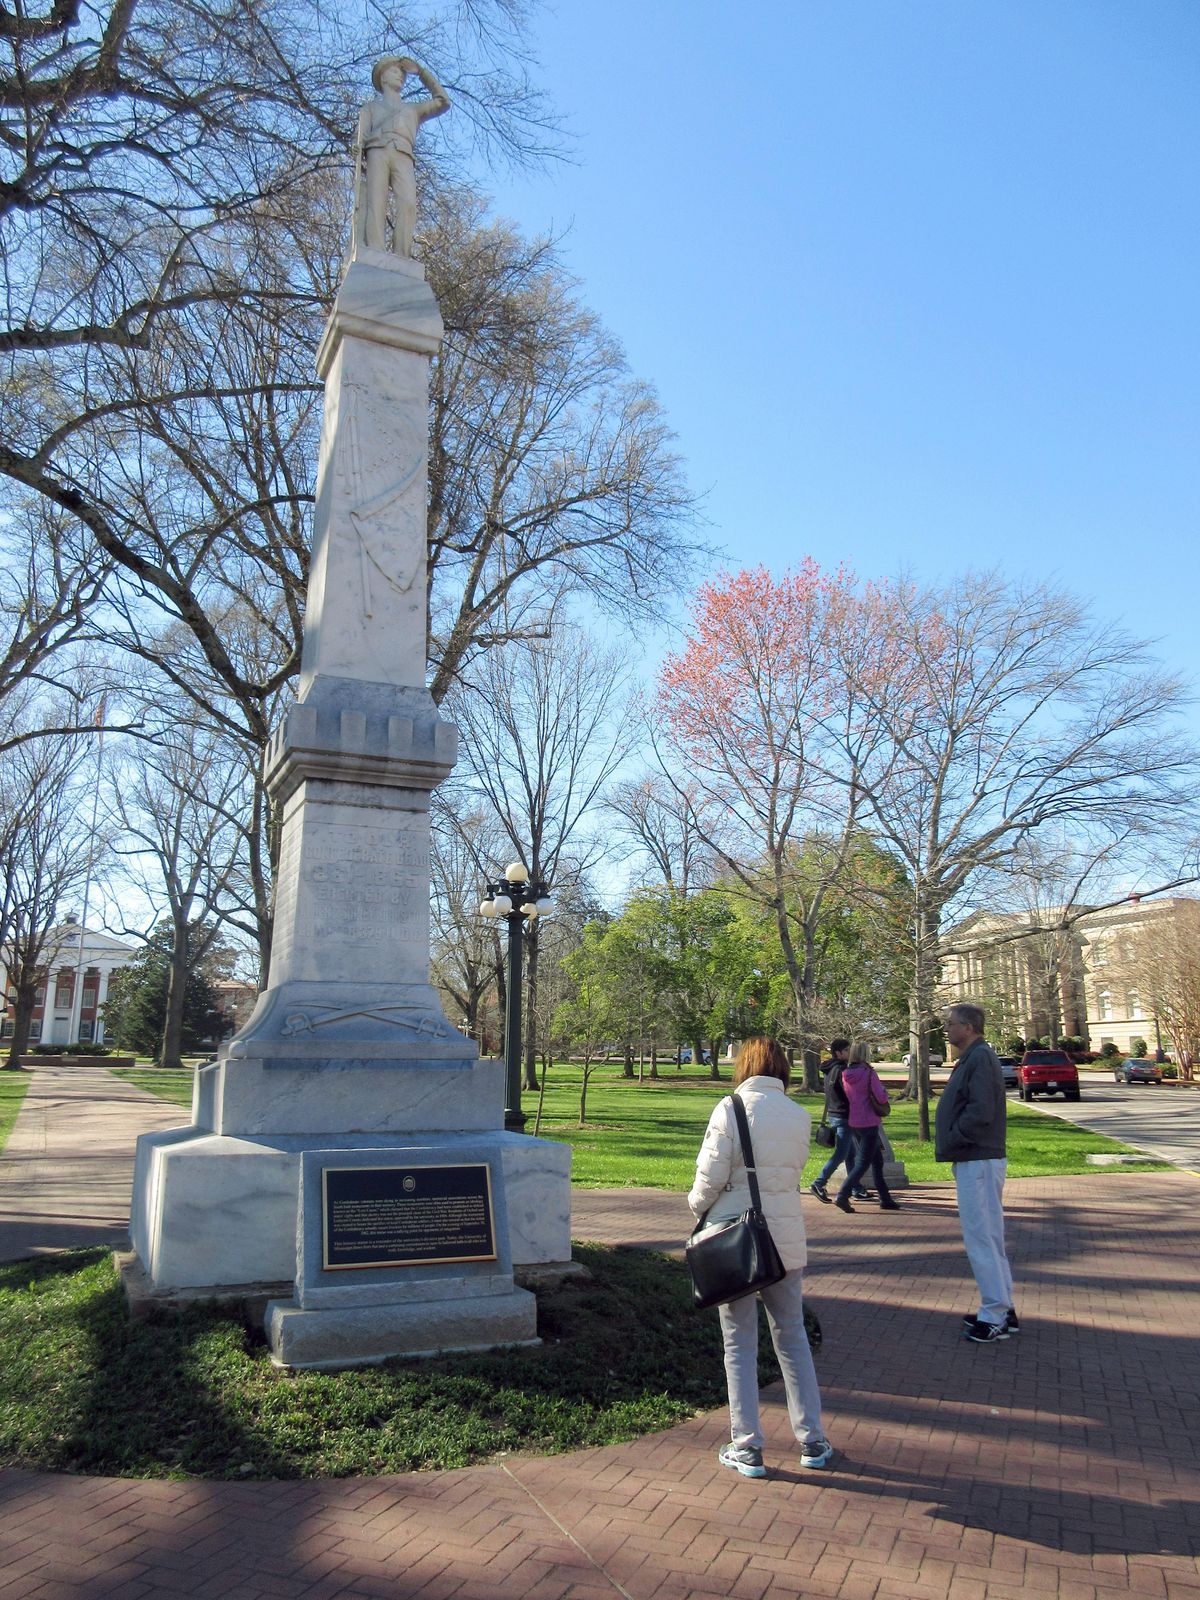 This March 12, 2017 photo shows a statue of a Confederate soldier on the campus of the University of Mississippi in Oxford, Miss. Another statue on campus honors James Meredith, an African-American student whose enrollment in 1962 sparked riots. (AP Photo/Beth J. Harpaz) ORG XMIT: NYLS219 (Beth J. Harpaz / AP)